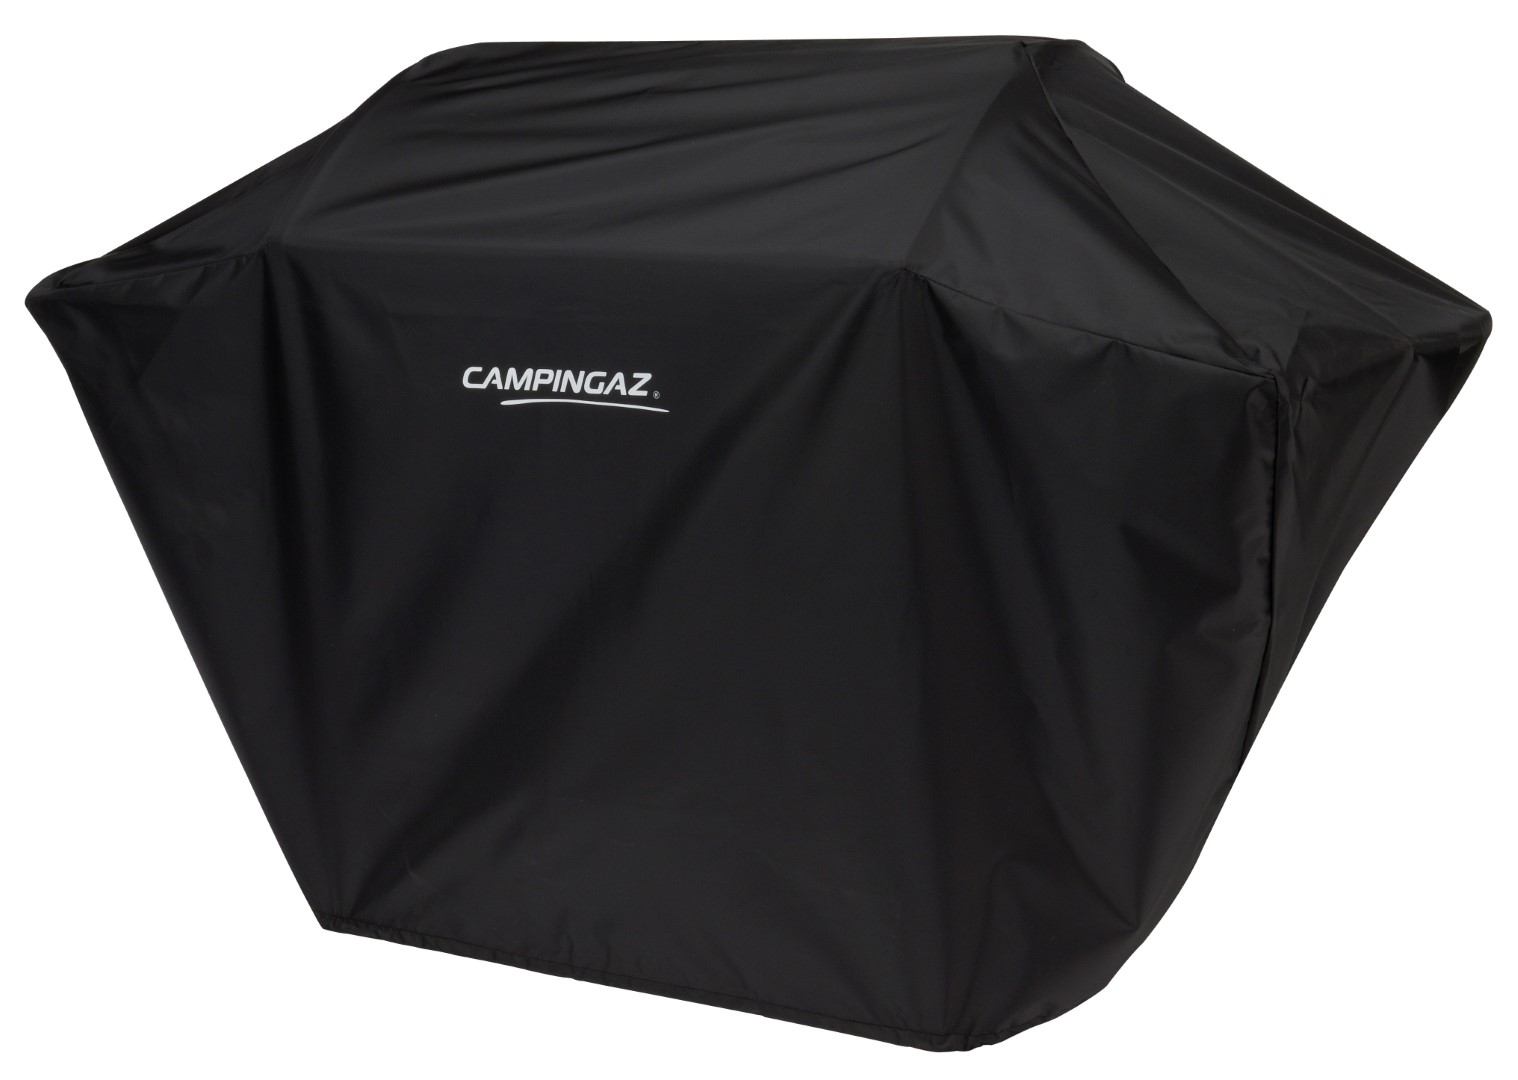 https://www.warentuin.nl/media/catalog/product/S/C/SCAN03138522119379_campingaz_barbecue_accessoire_barbecue_classic_cover_l_d7a8.jpg